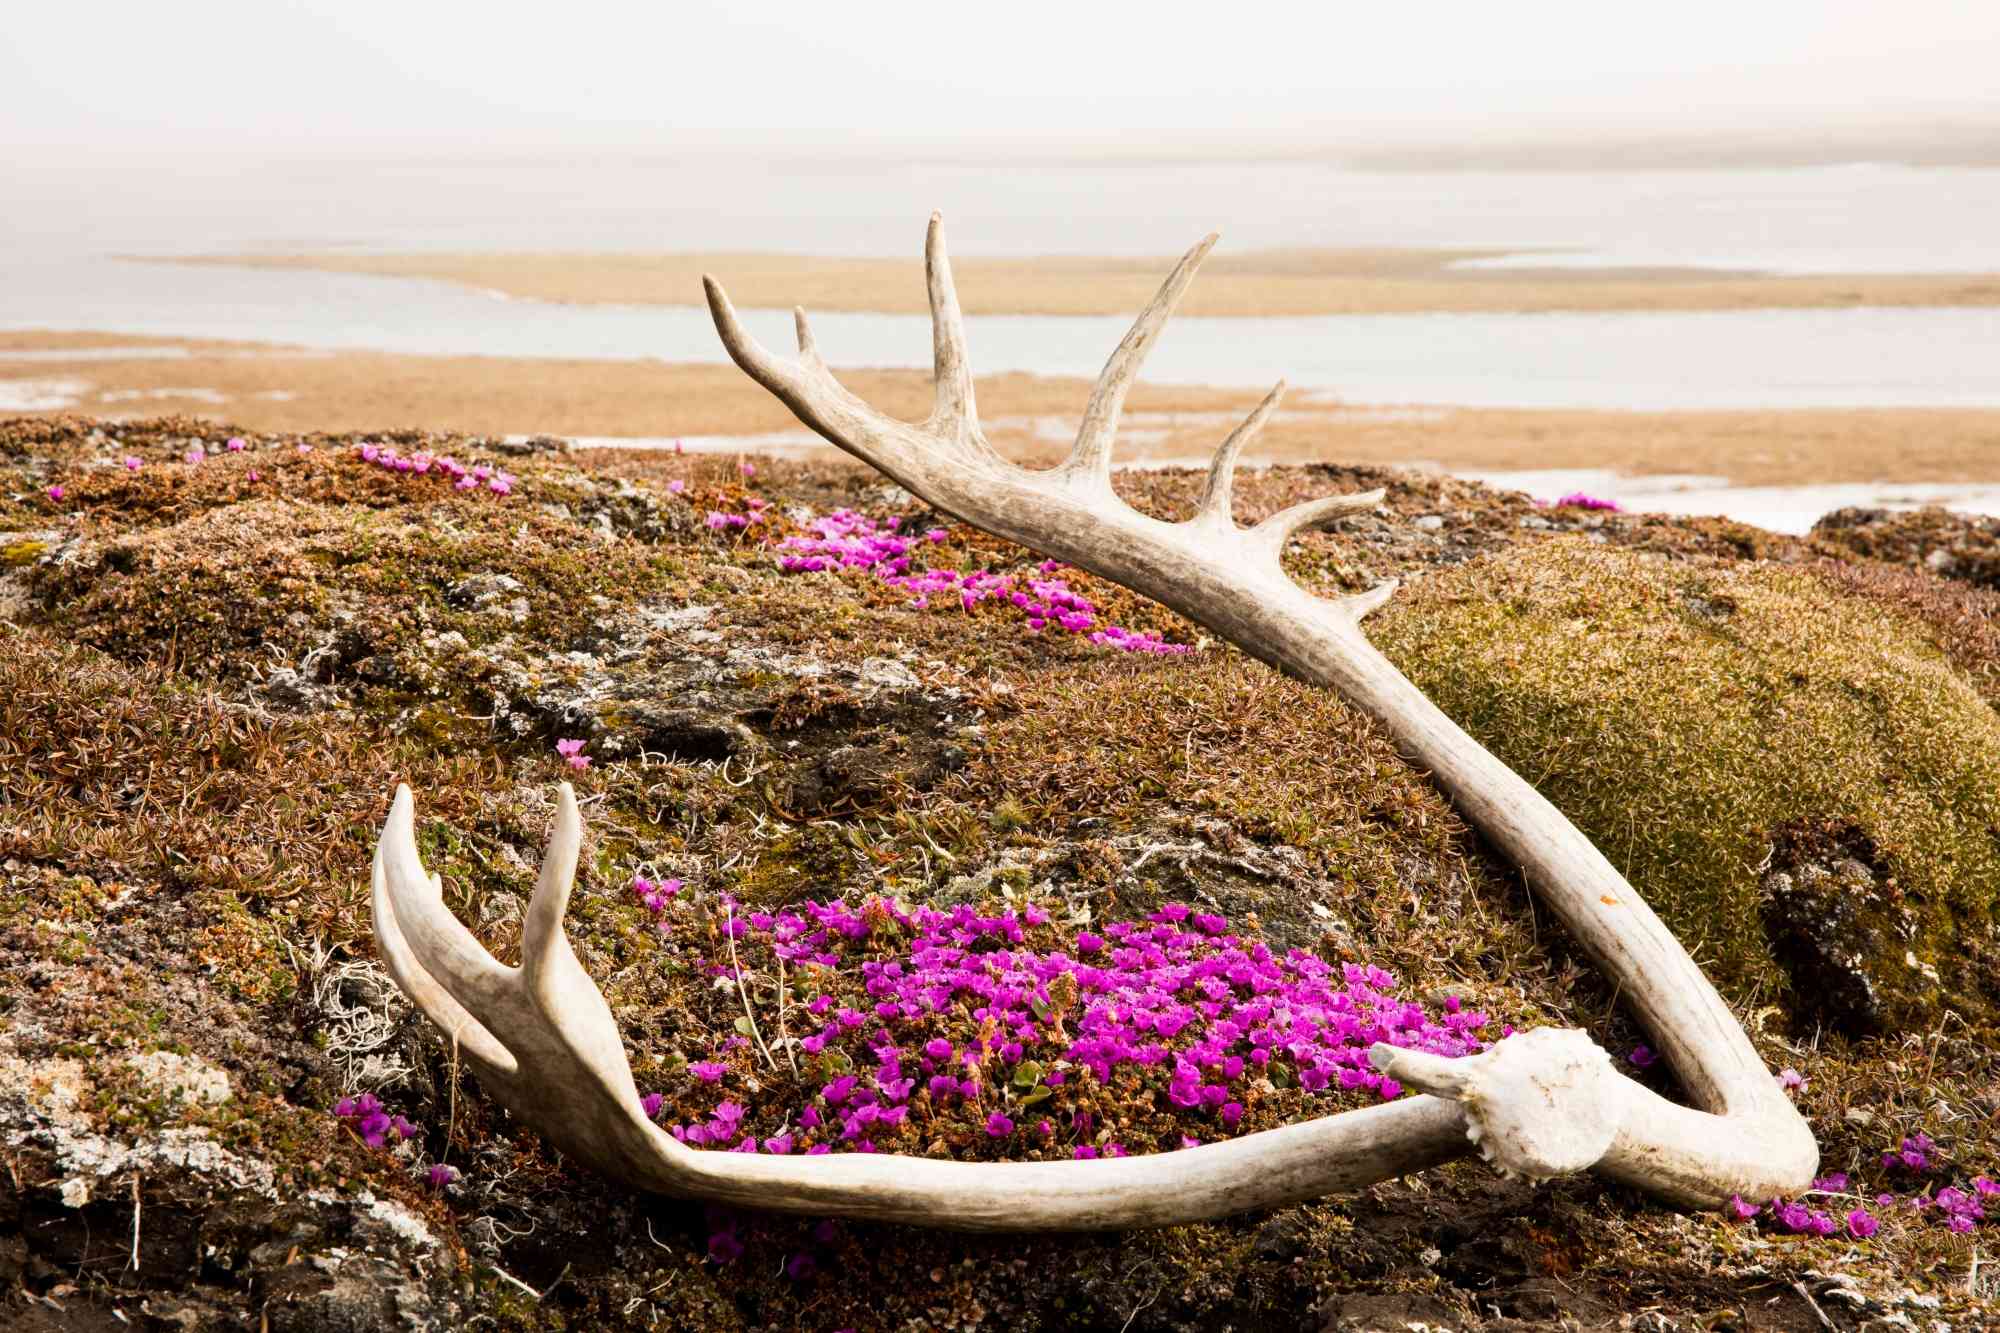 Caribou antlers and flowers Arctic National Wildlife Refuge 